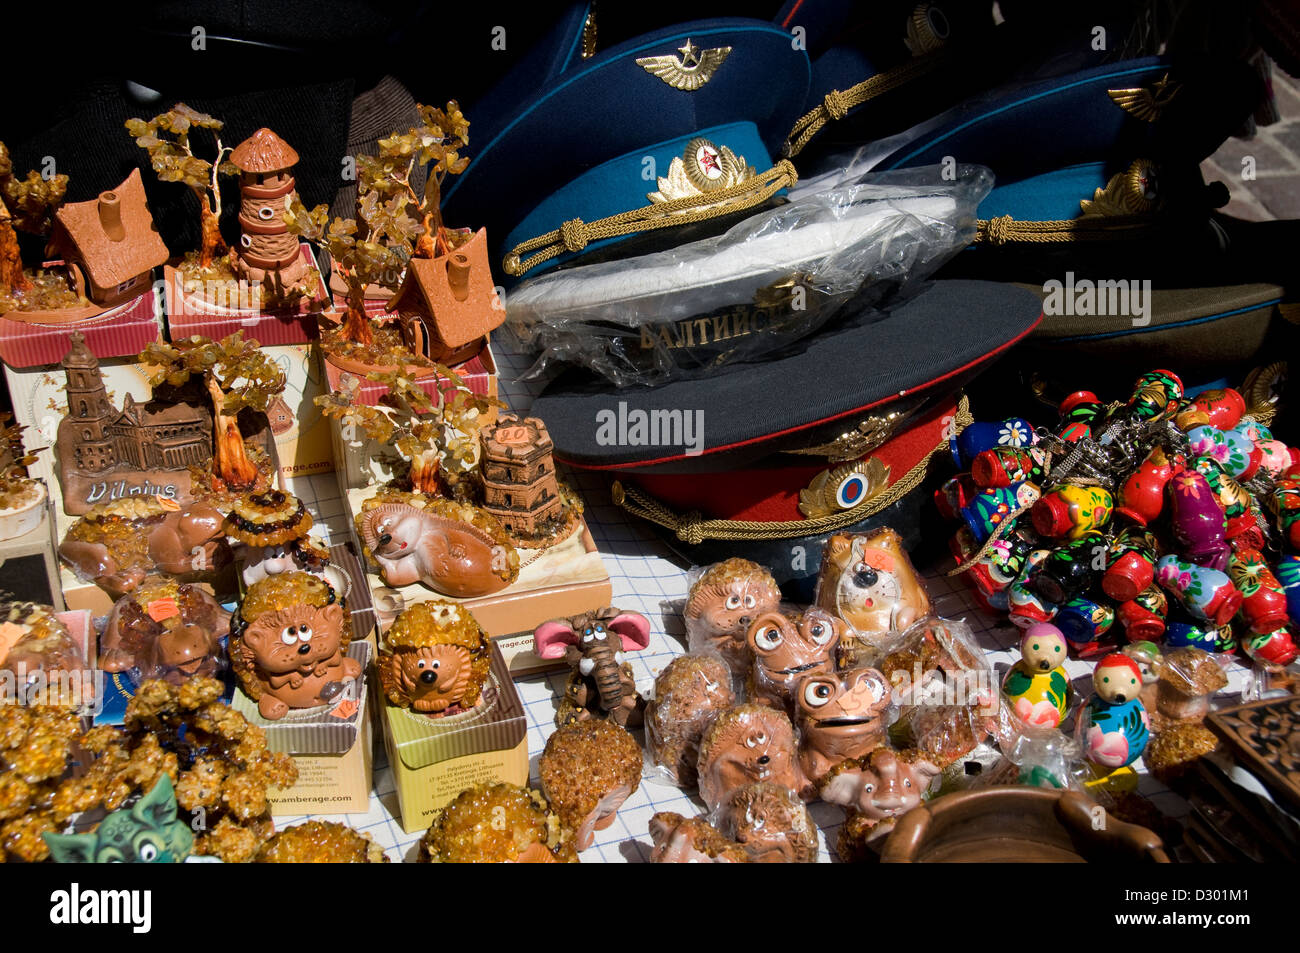 A Lithuanian market souvenir stall in Pilies Gatve, one of the main shopping streets in Vilnius Old Town, Vilnius, Lithuania Stock Photo